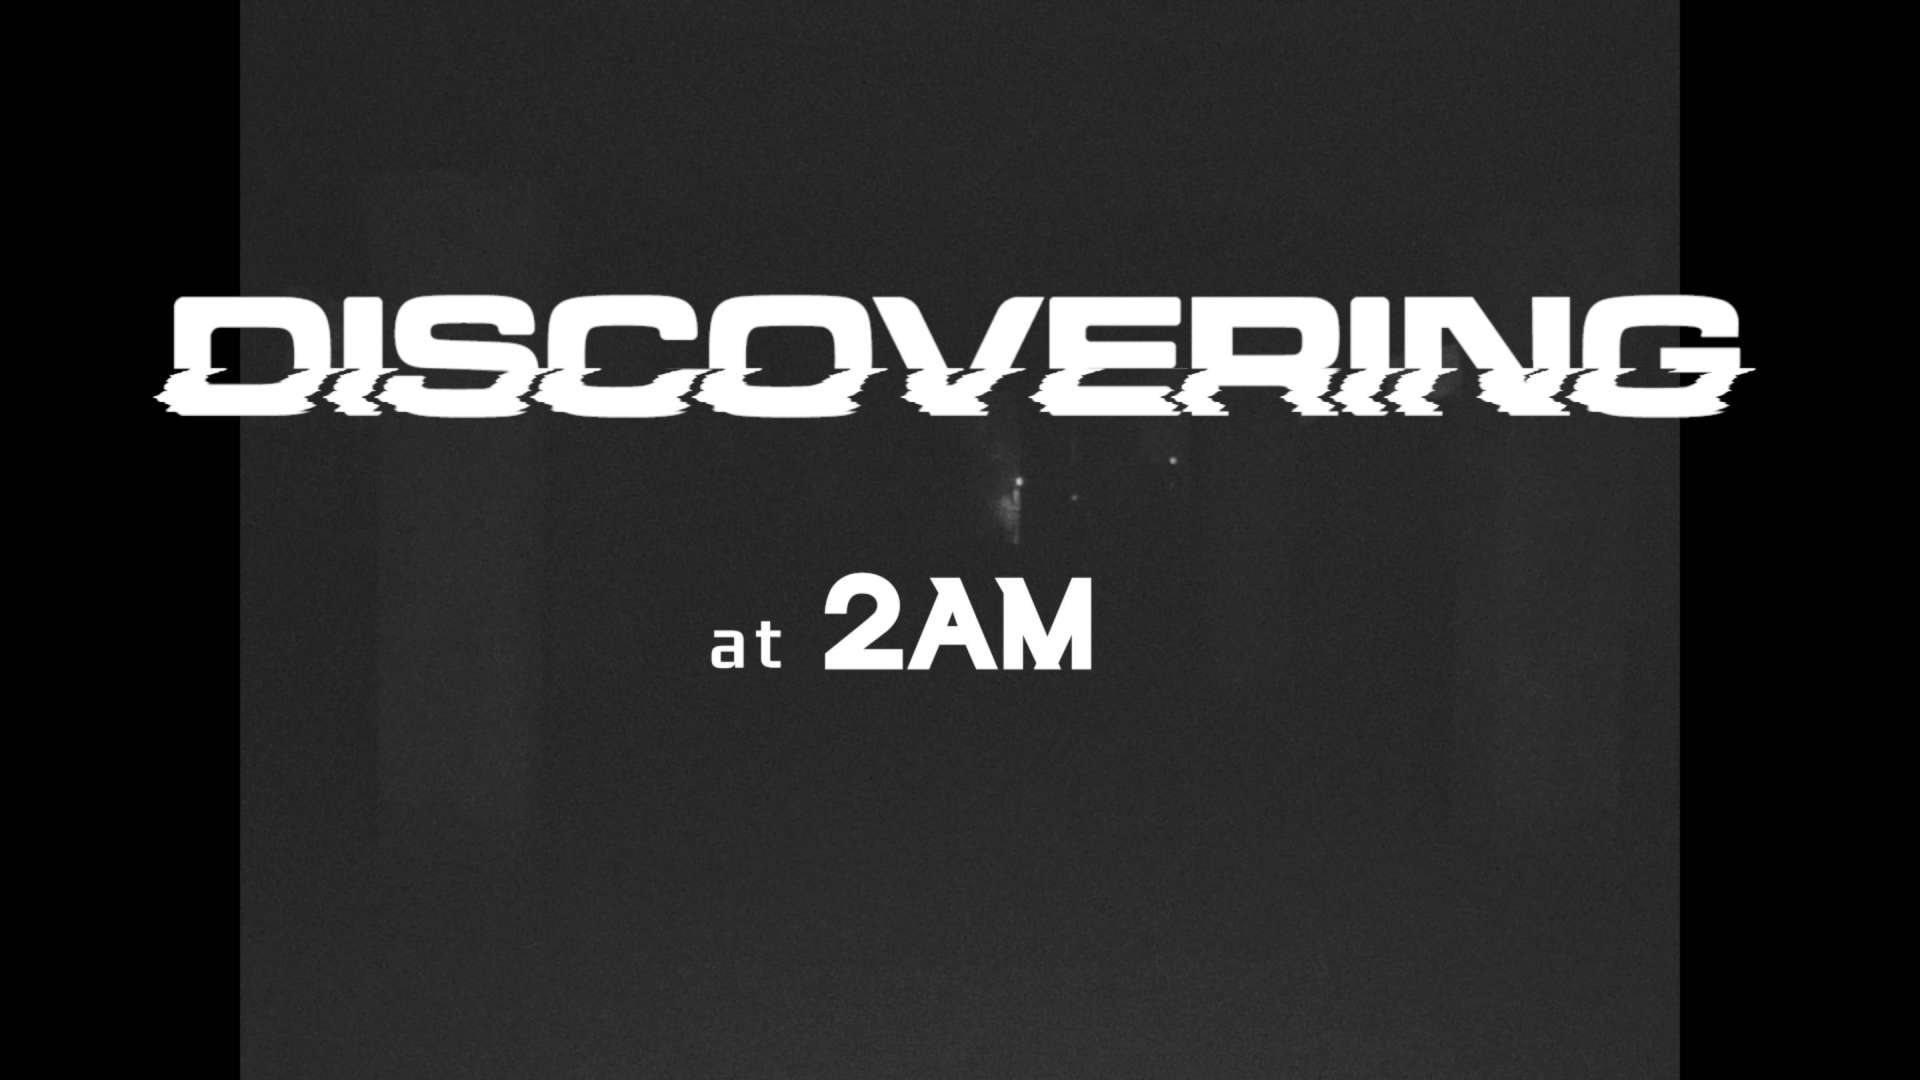 2AM｜WILDHEART - Discovering at 2AM